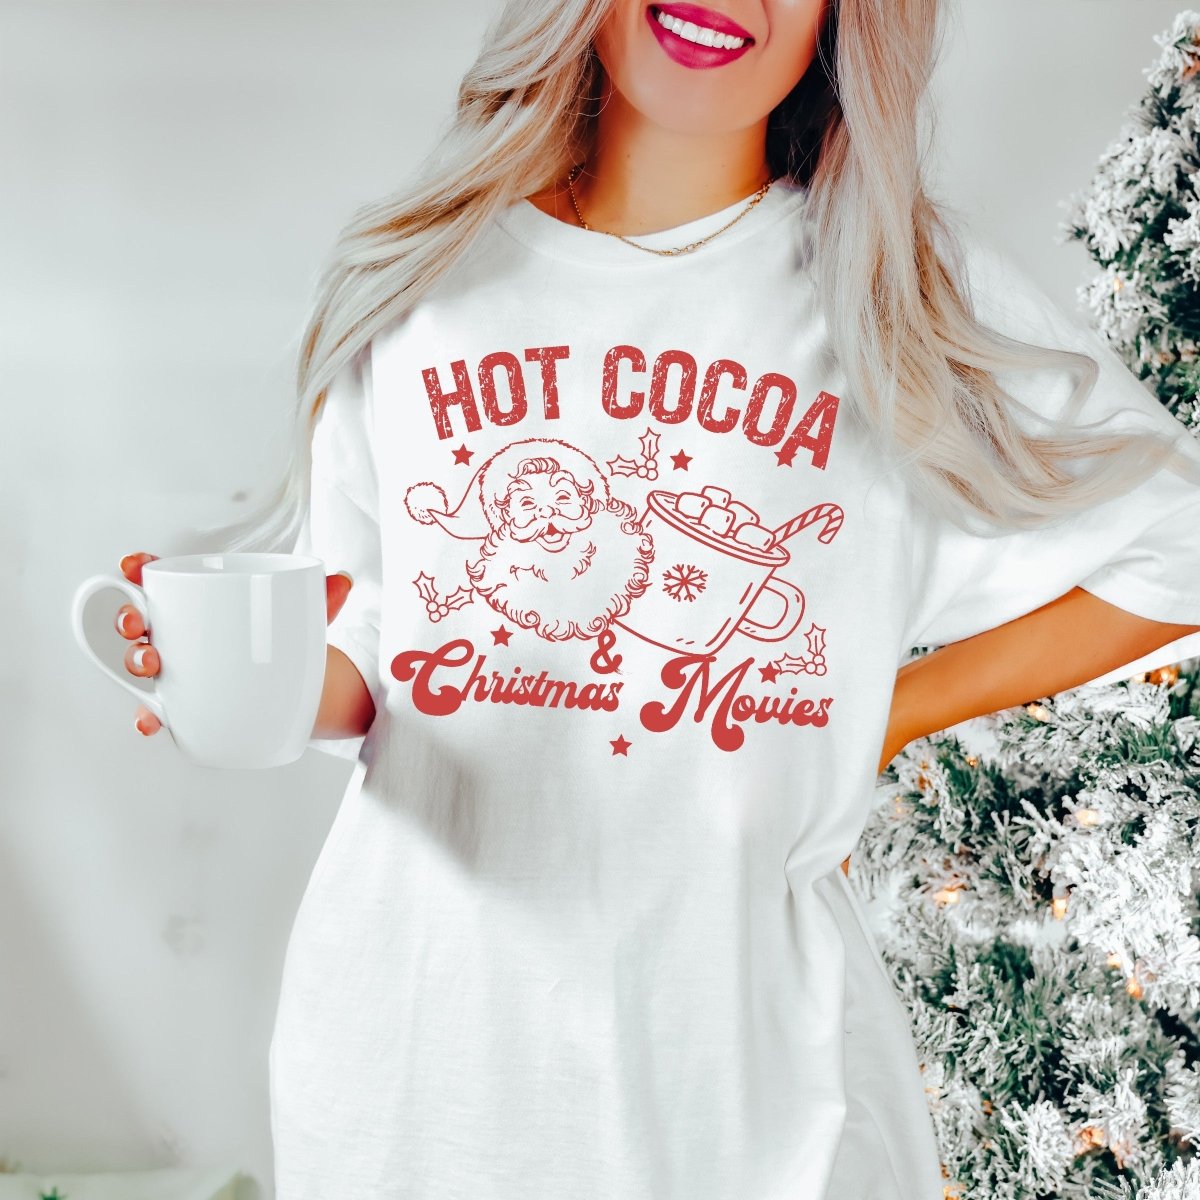 Hot Cocoa Christmas Movies Comfort color Wholesale tee - Limeberry Designs